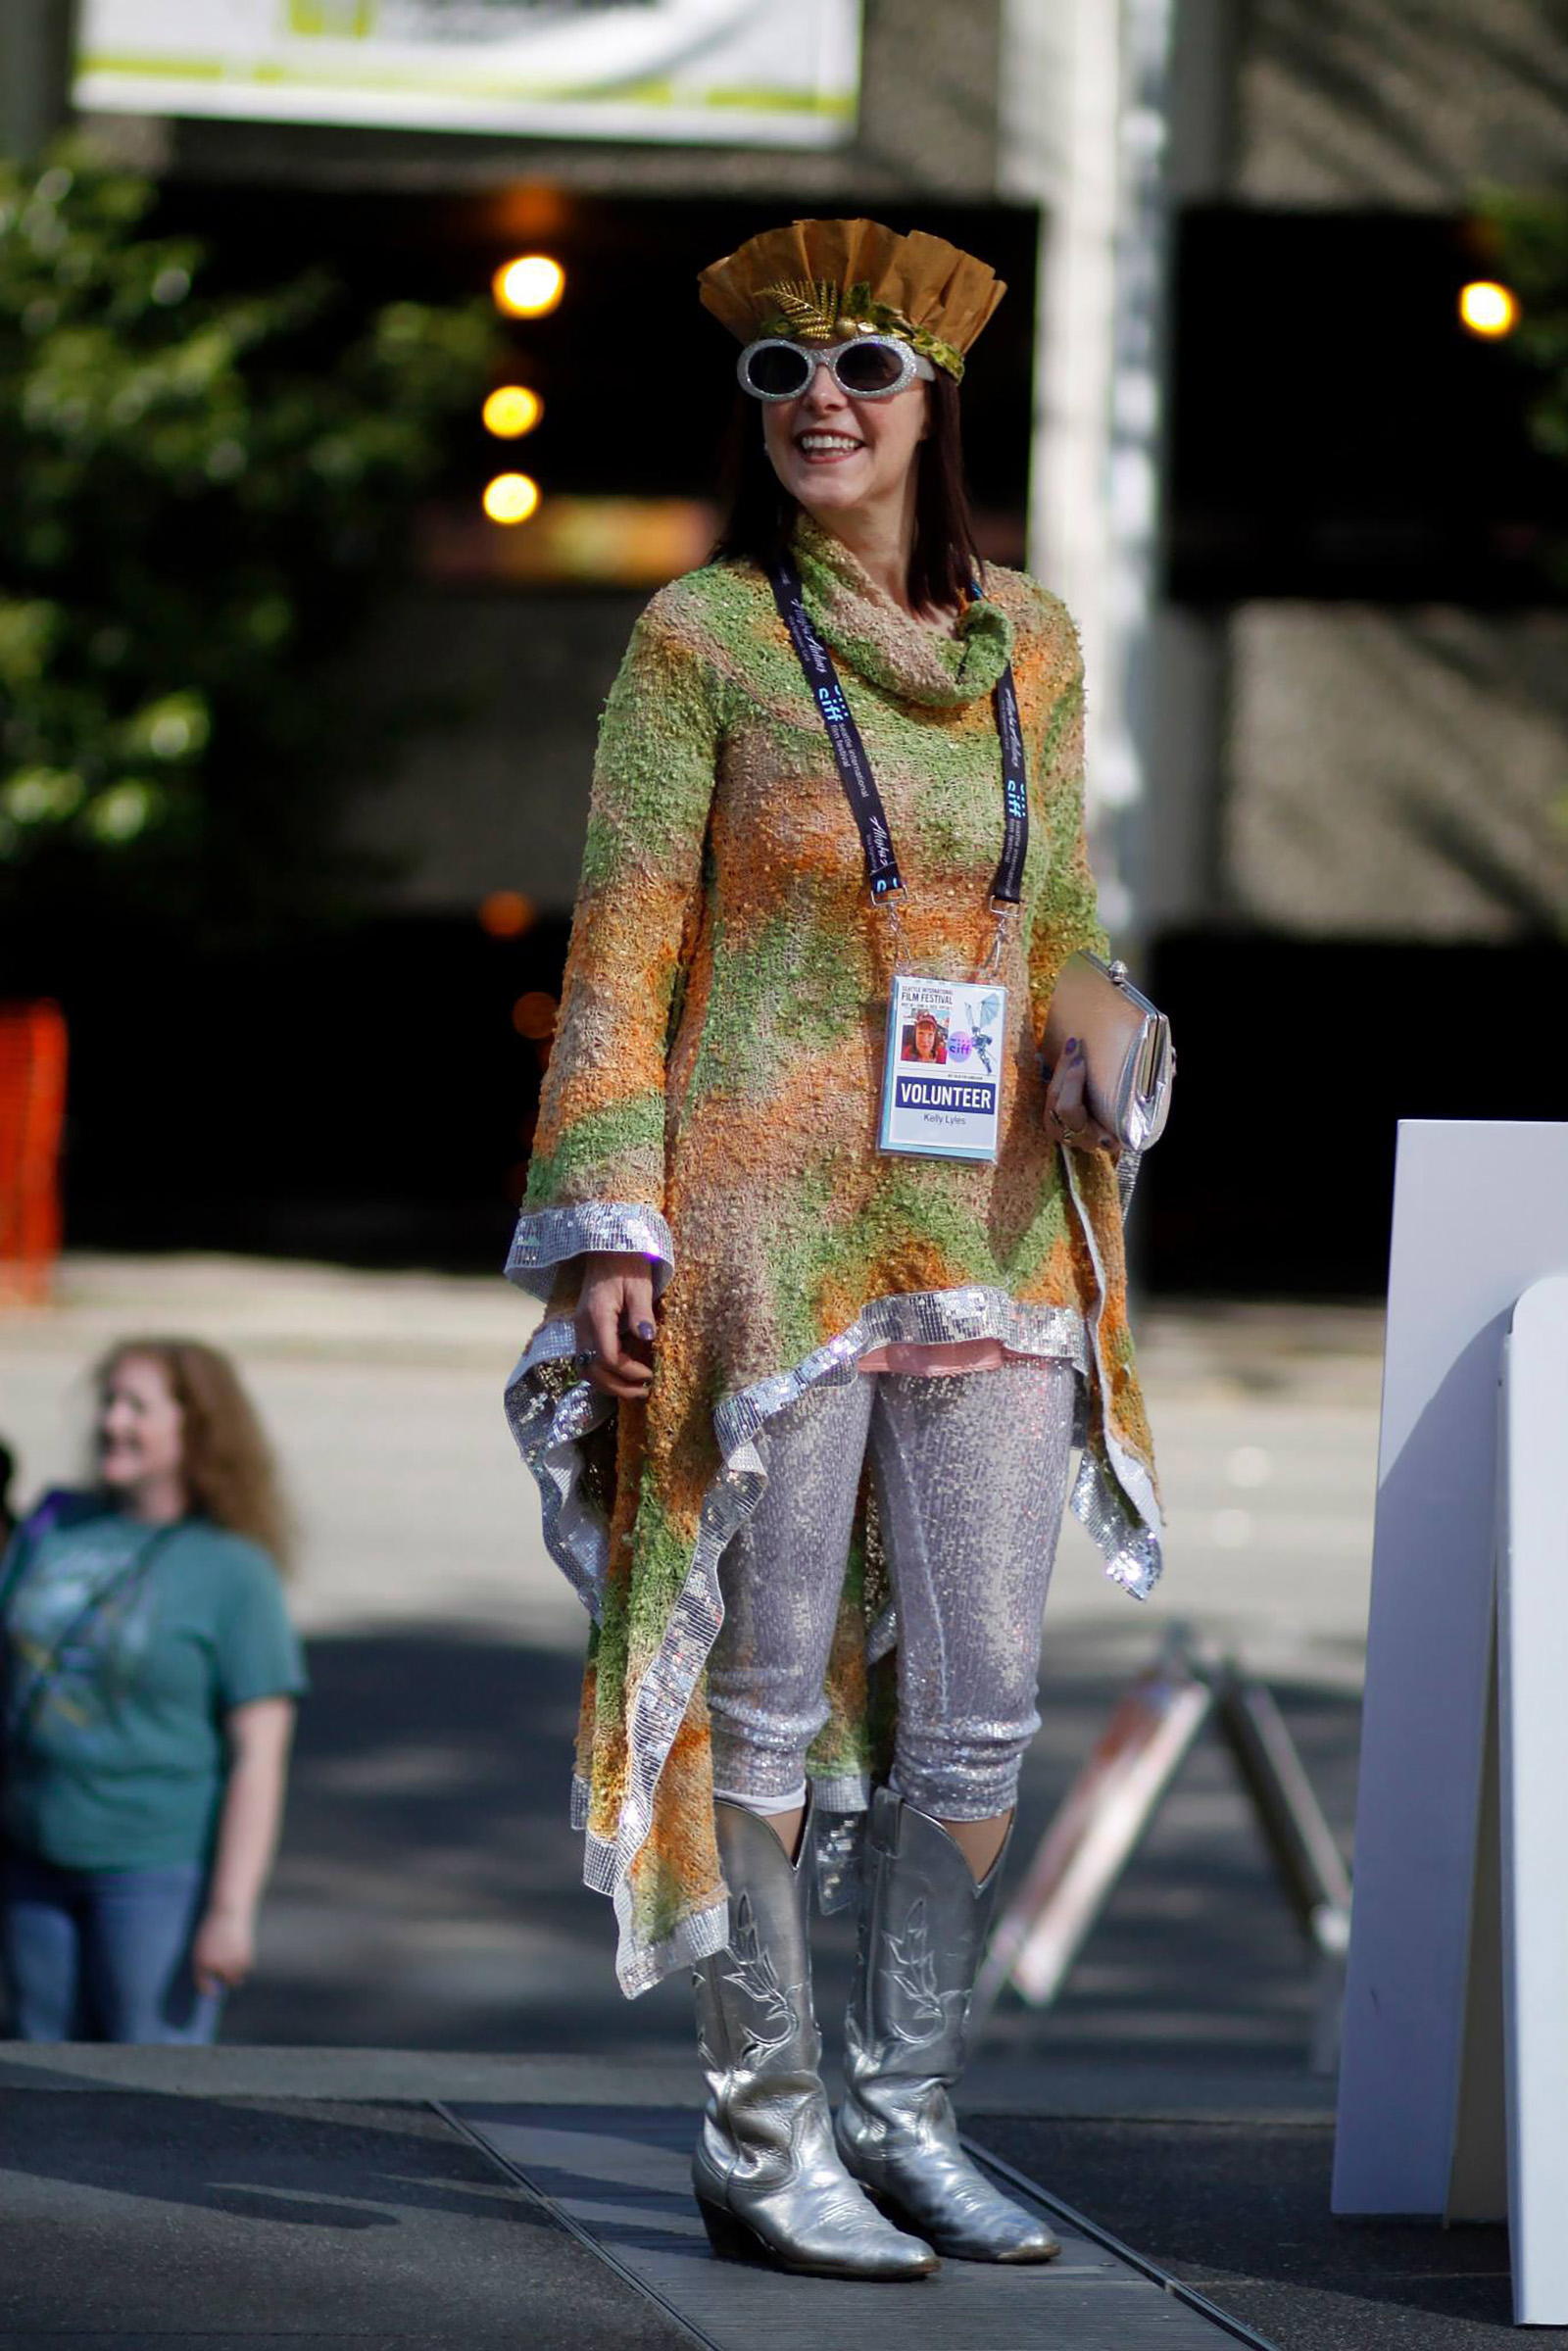 SIFF volunteer, Kelly Lyles, arriving at Opening Night of the 39th Seattle International Film Festival in style